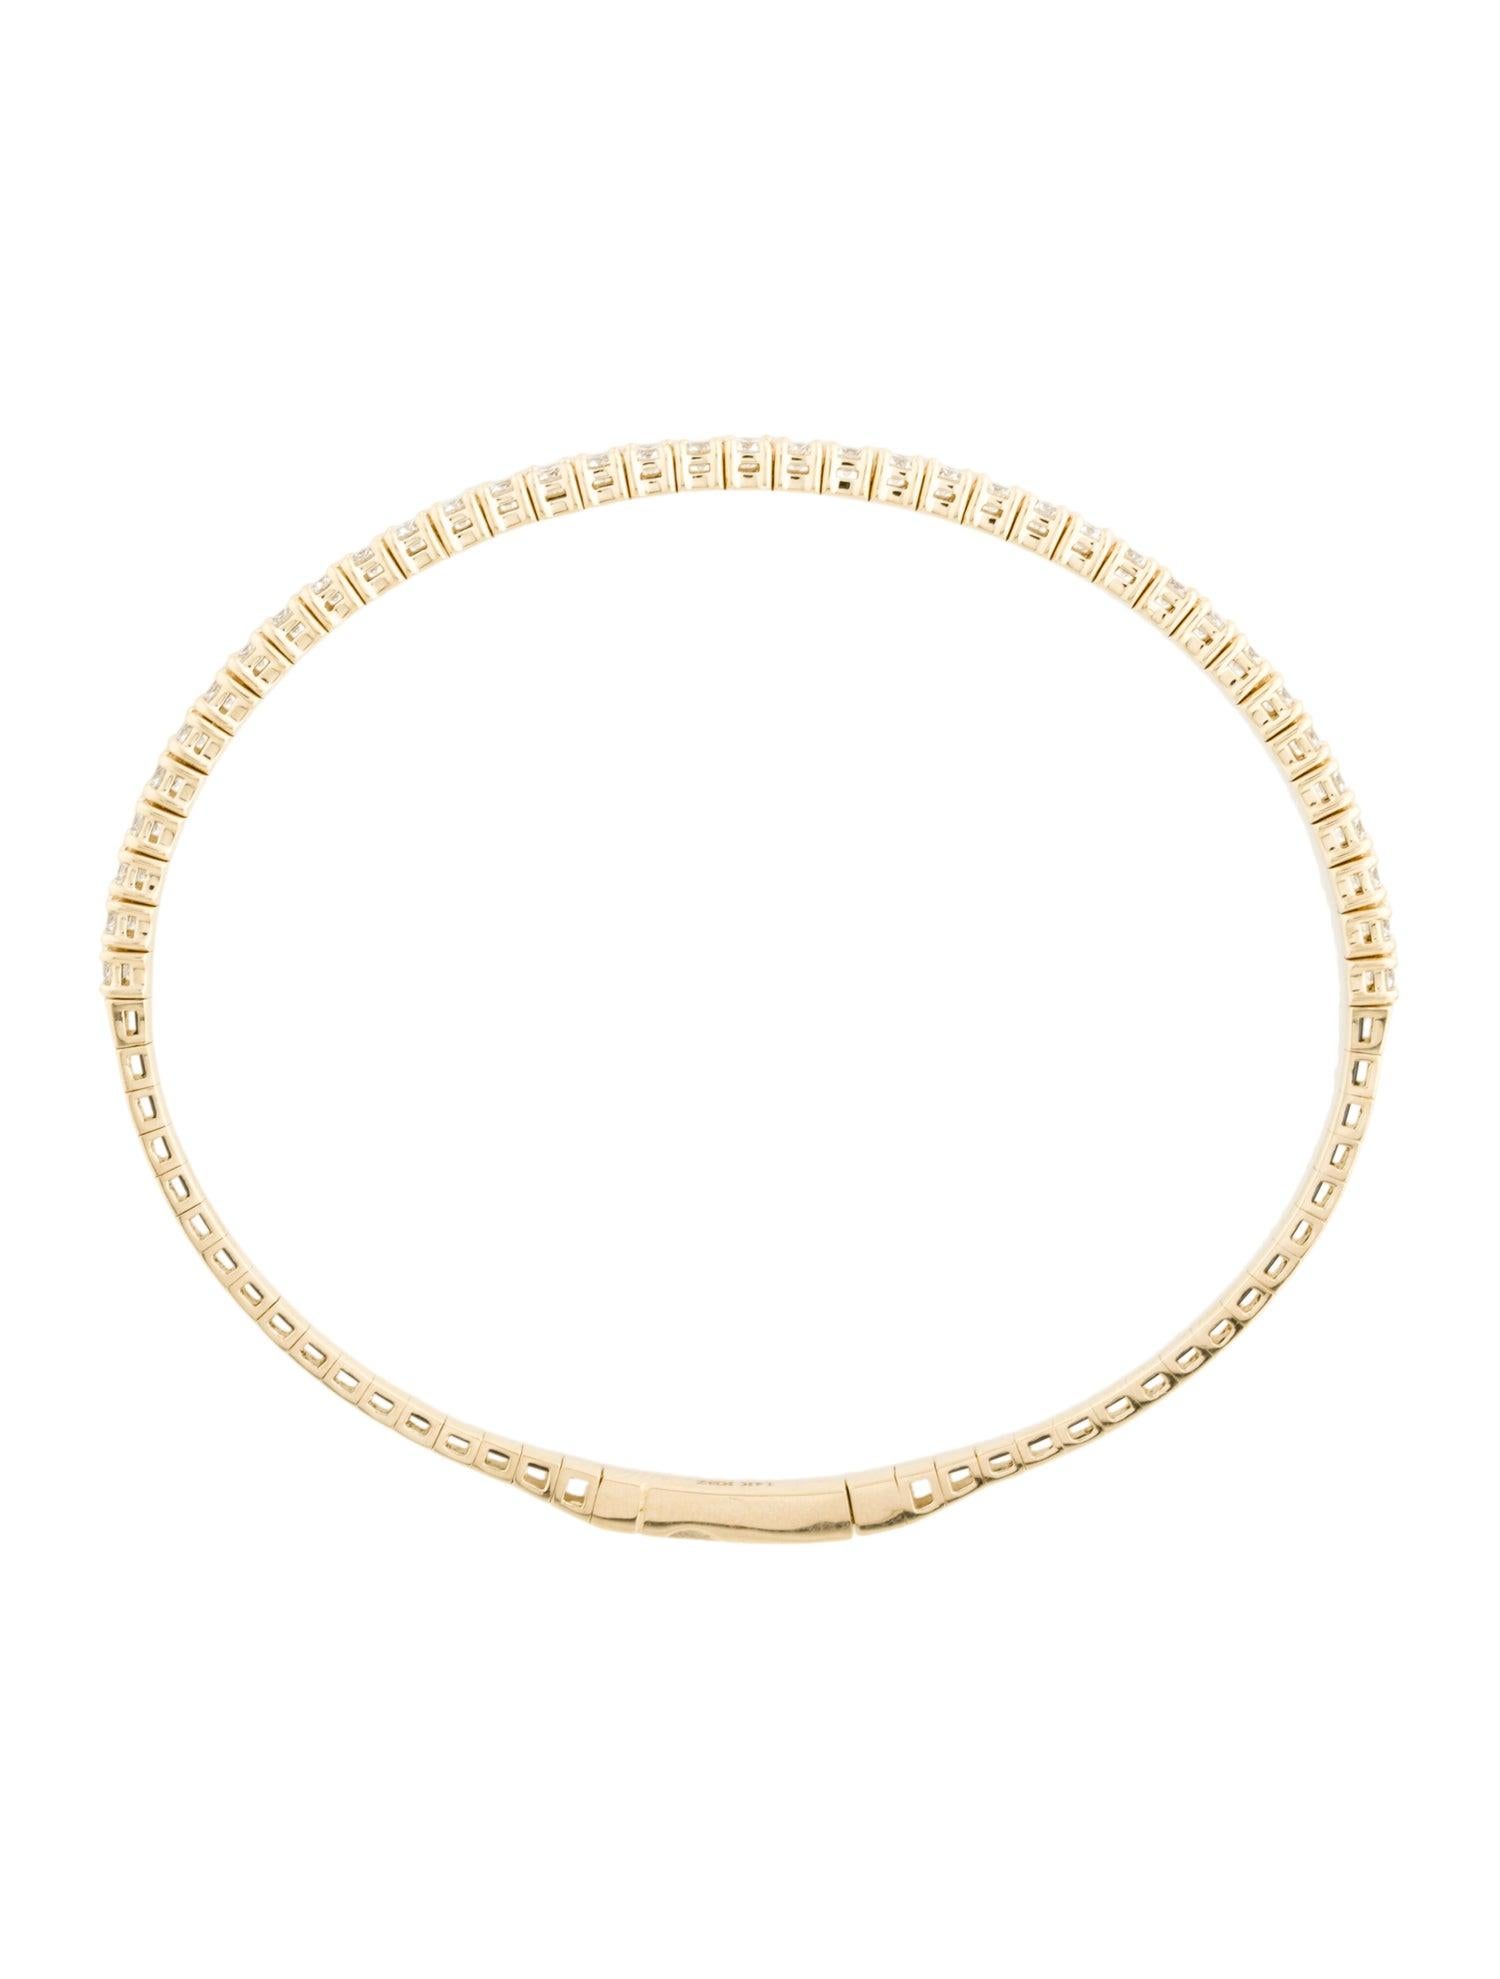 Quality Flexible Stackable Bangle: Made from real 14k gold and 37 glittering white approximately 1.45 ct. Certified diamonds, featuring a single row of white diamonds flexible diameter for comfort with a color and clarity of GH-SI

Surprise Your